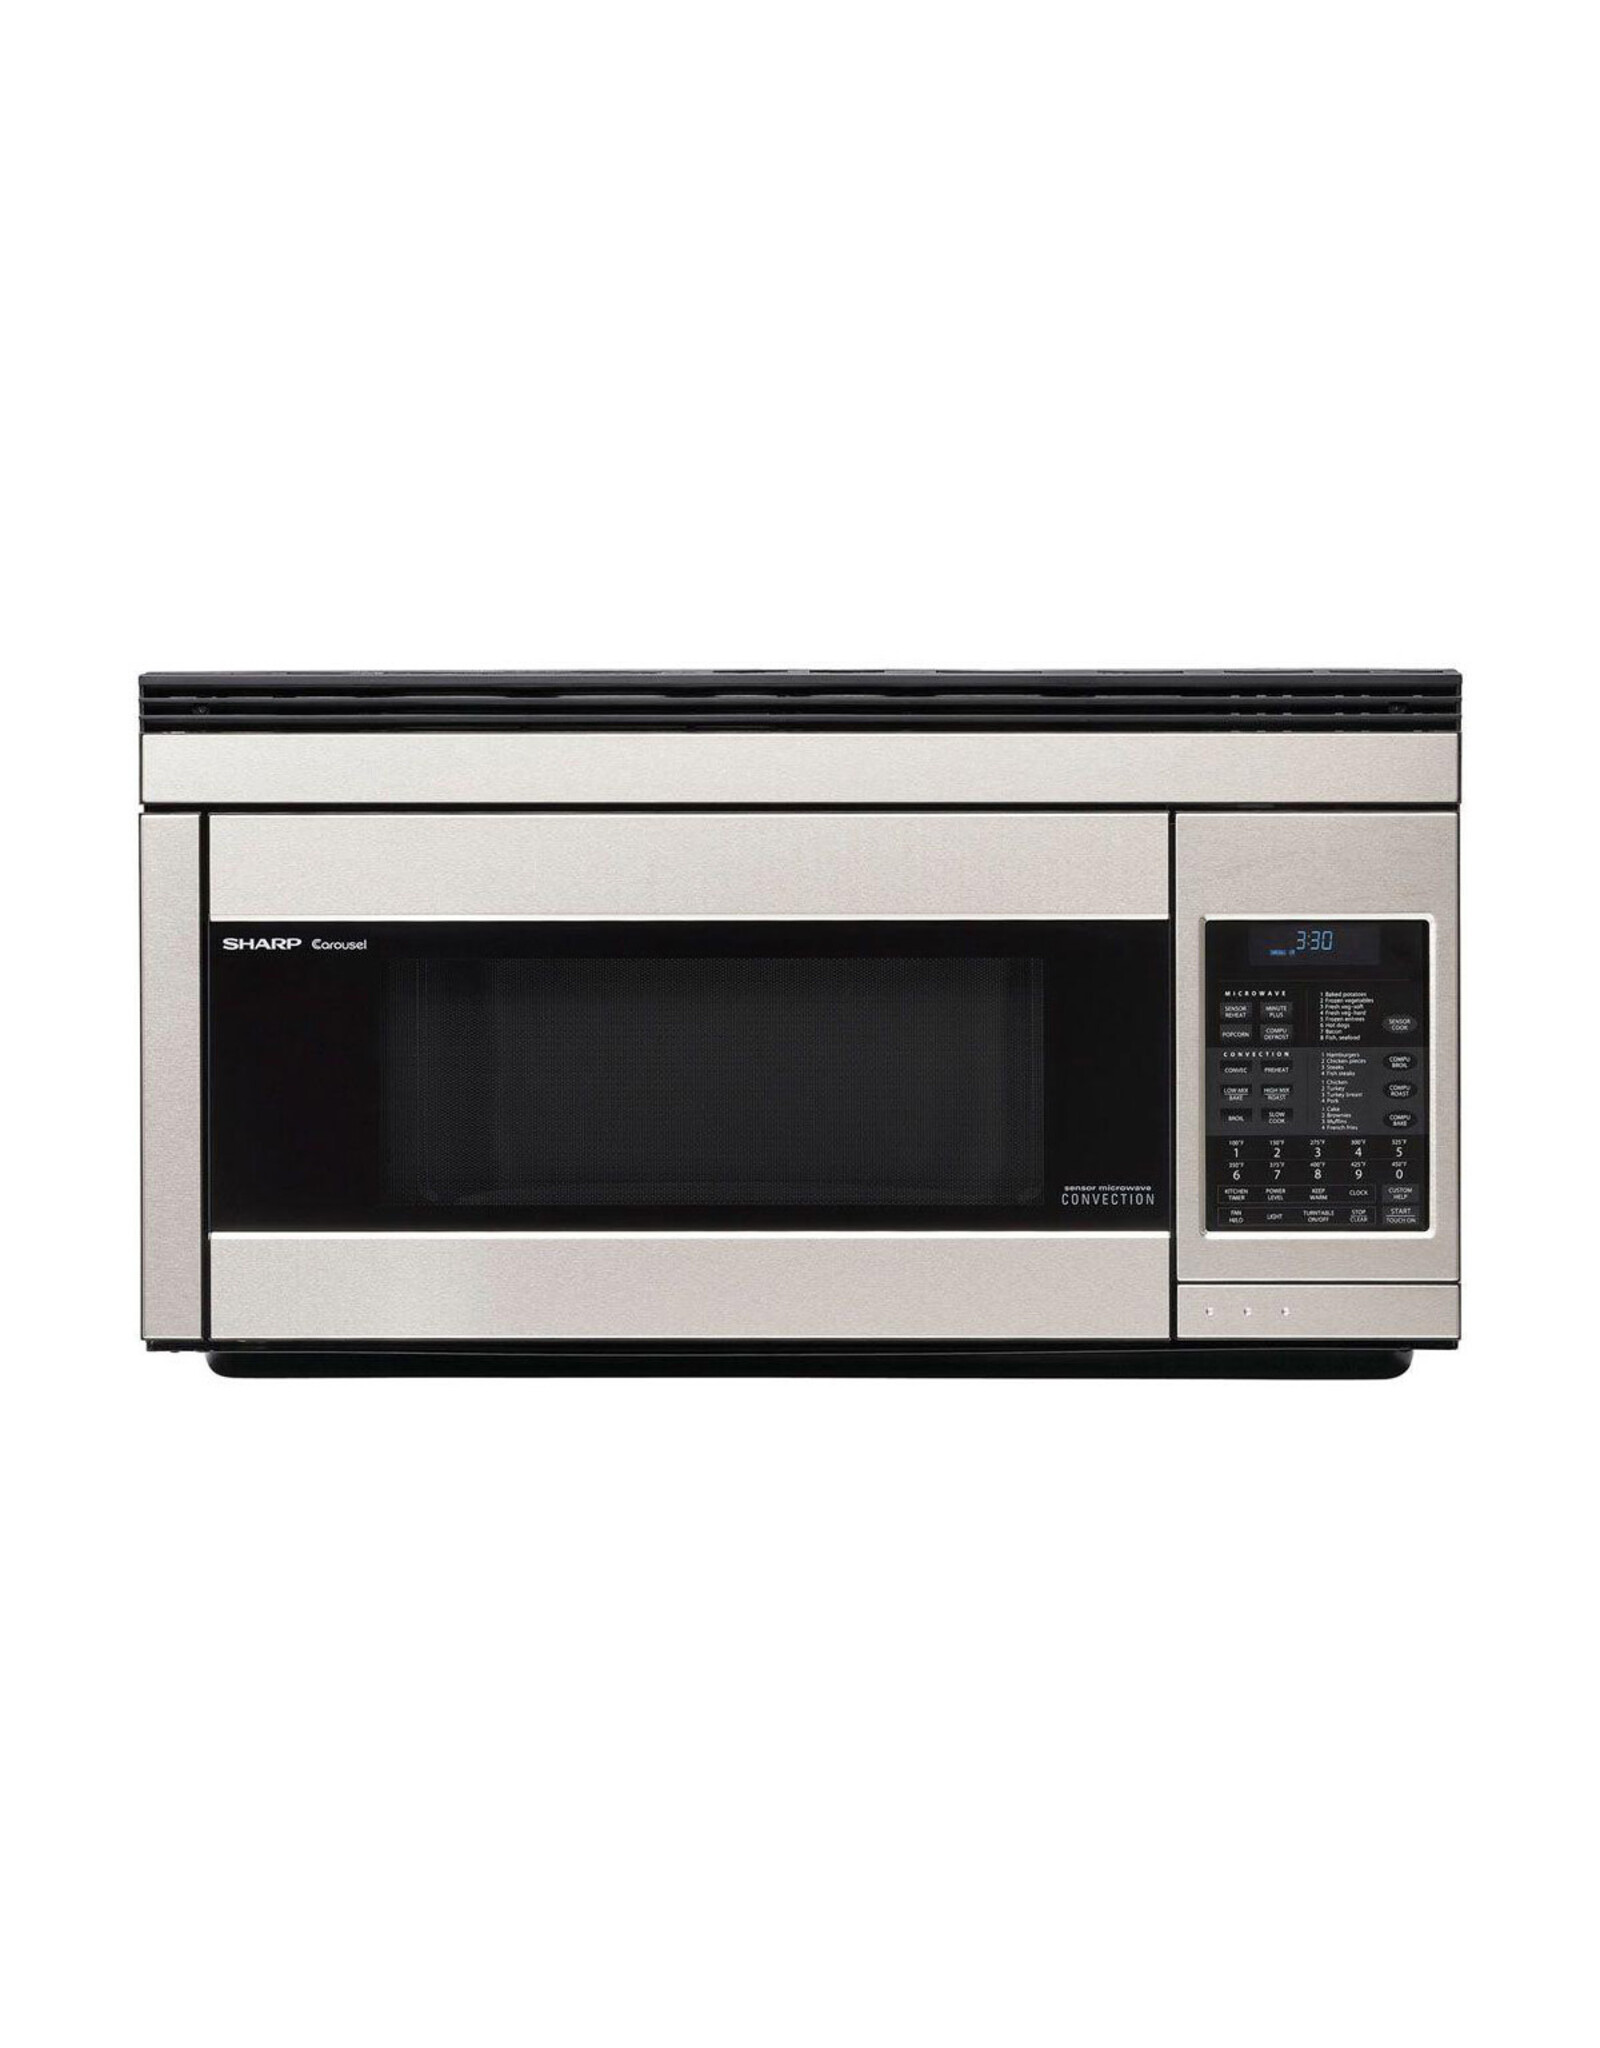 Sharp R1874TY 30 Inch Over the Range Microwave Oven with 1.1 cu. ft. Capacity, in Stainless Steel